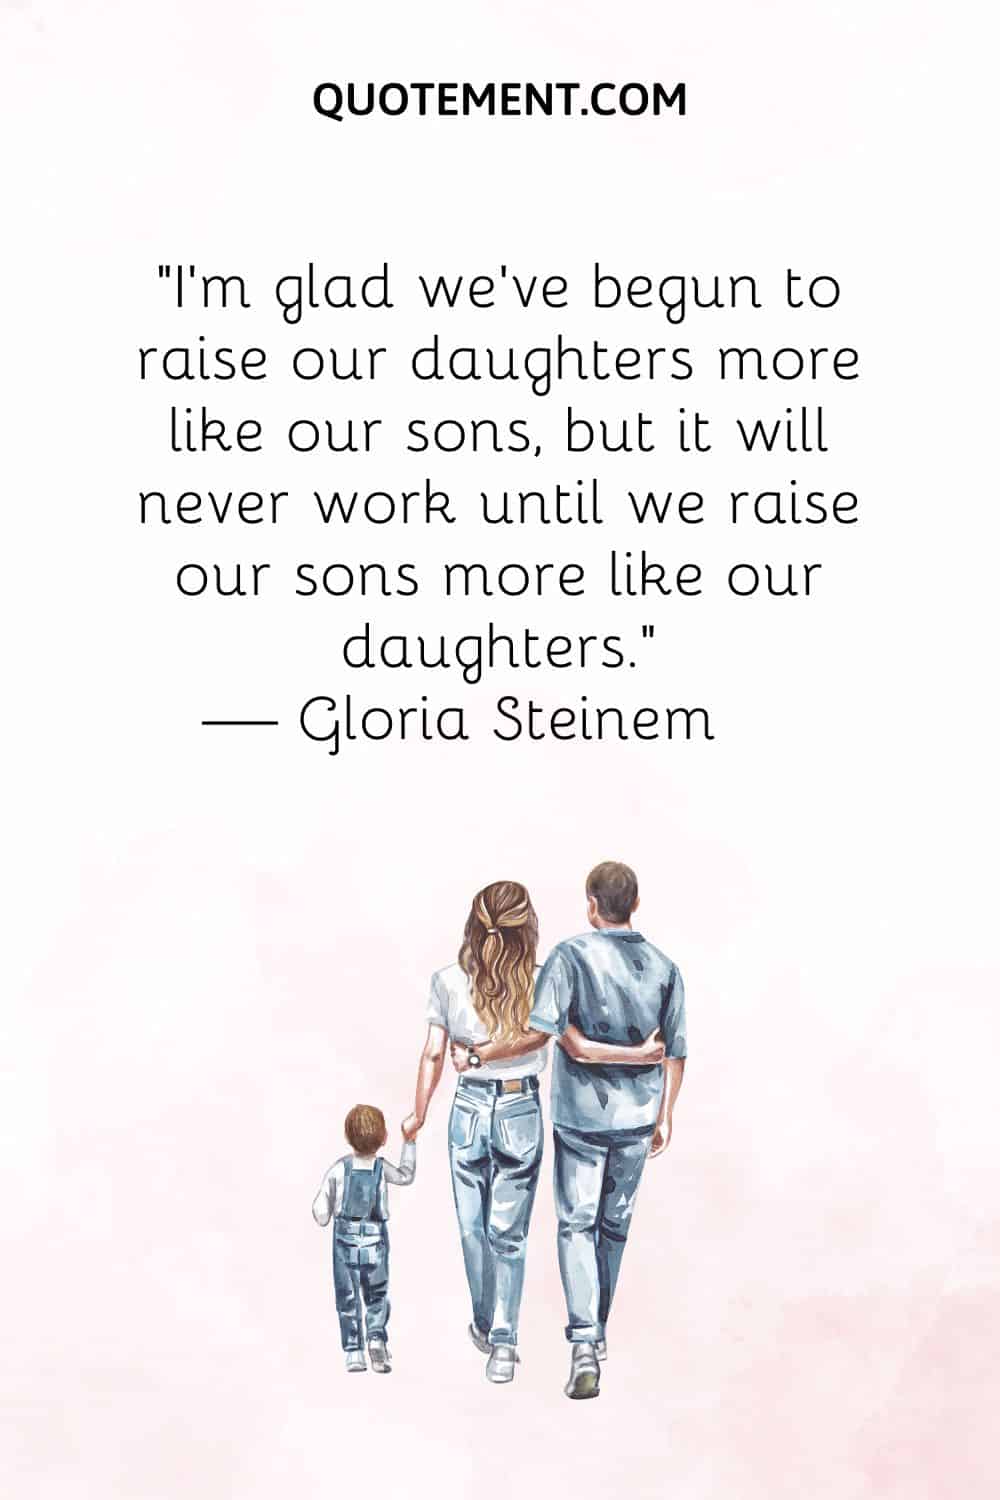 I’m glad we’ve begun to raise our daughters more like our sons, but it will never work until we raise our sons more like our daughters